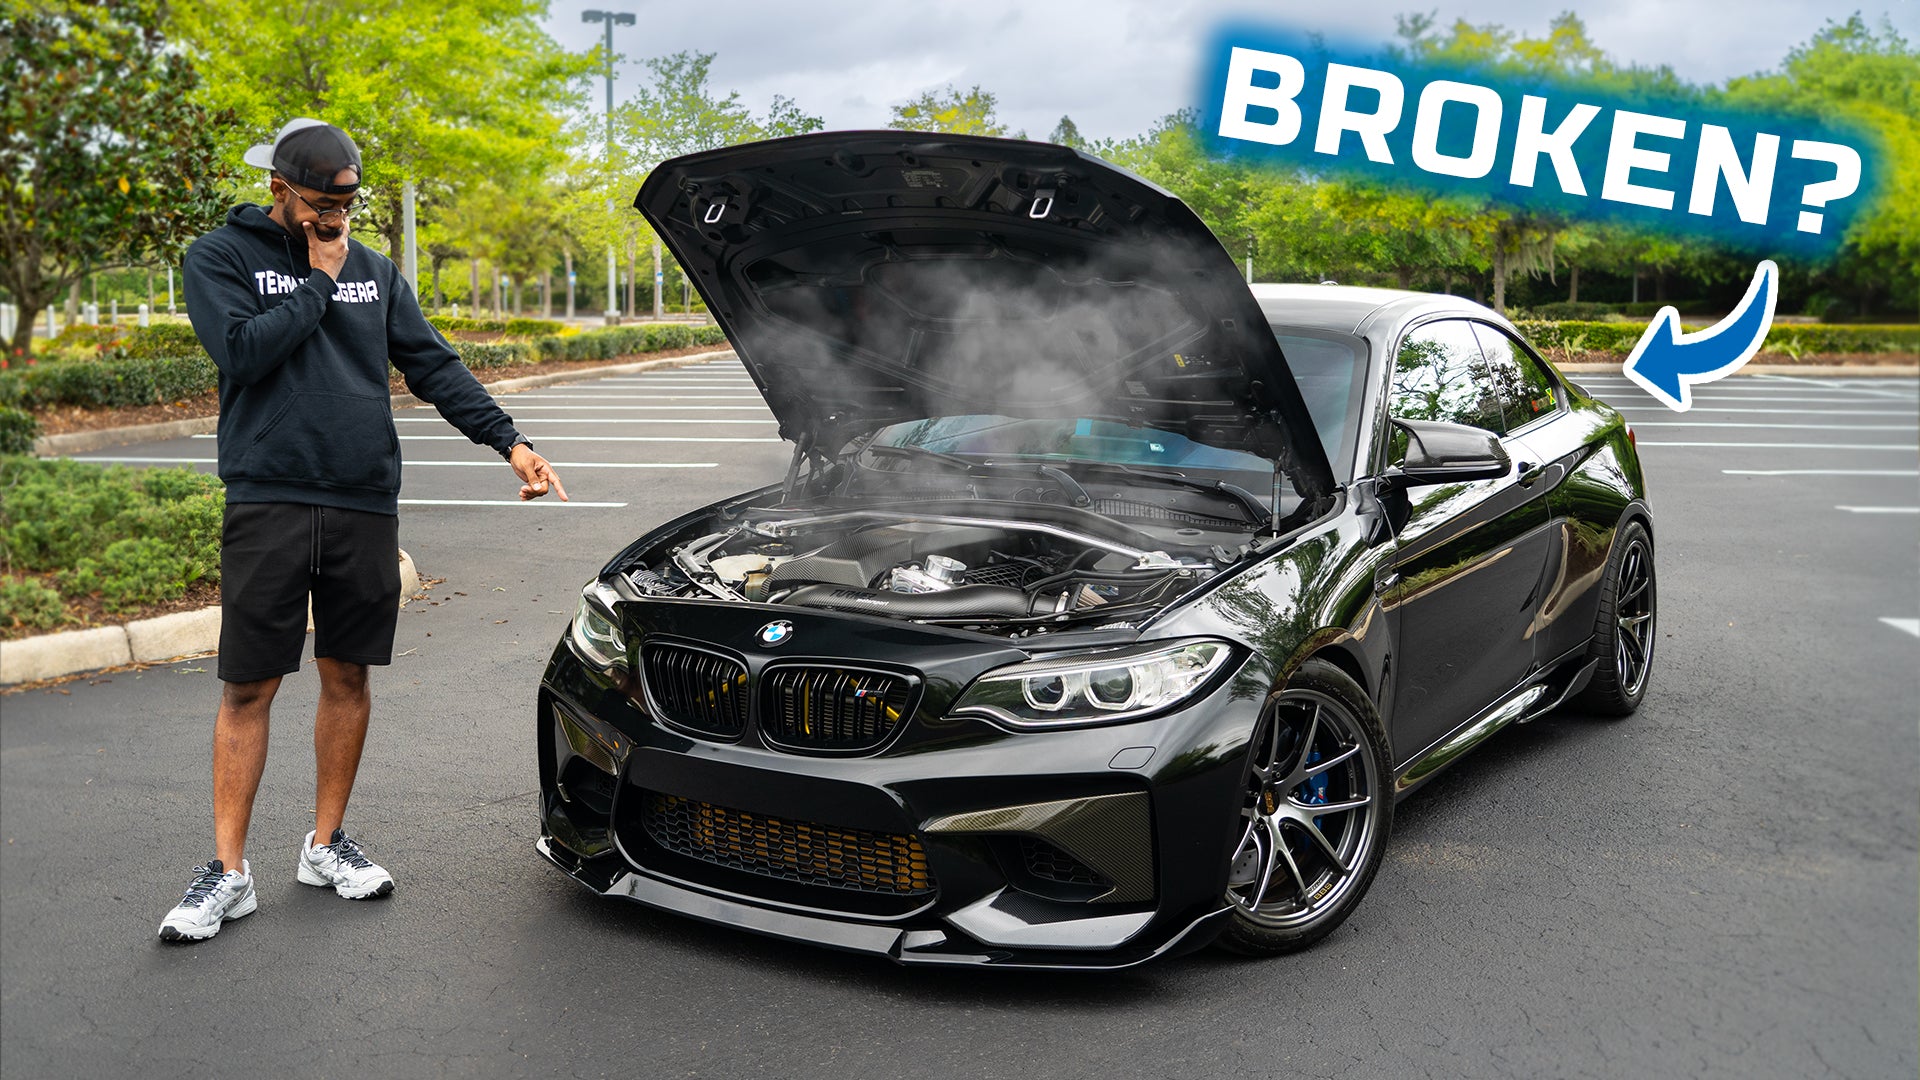 Load video: In this video we work towards diagnosing and fixing a reoccurring issue on my BMW F87 M2 with error codes P120D &amp; P00BD.